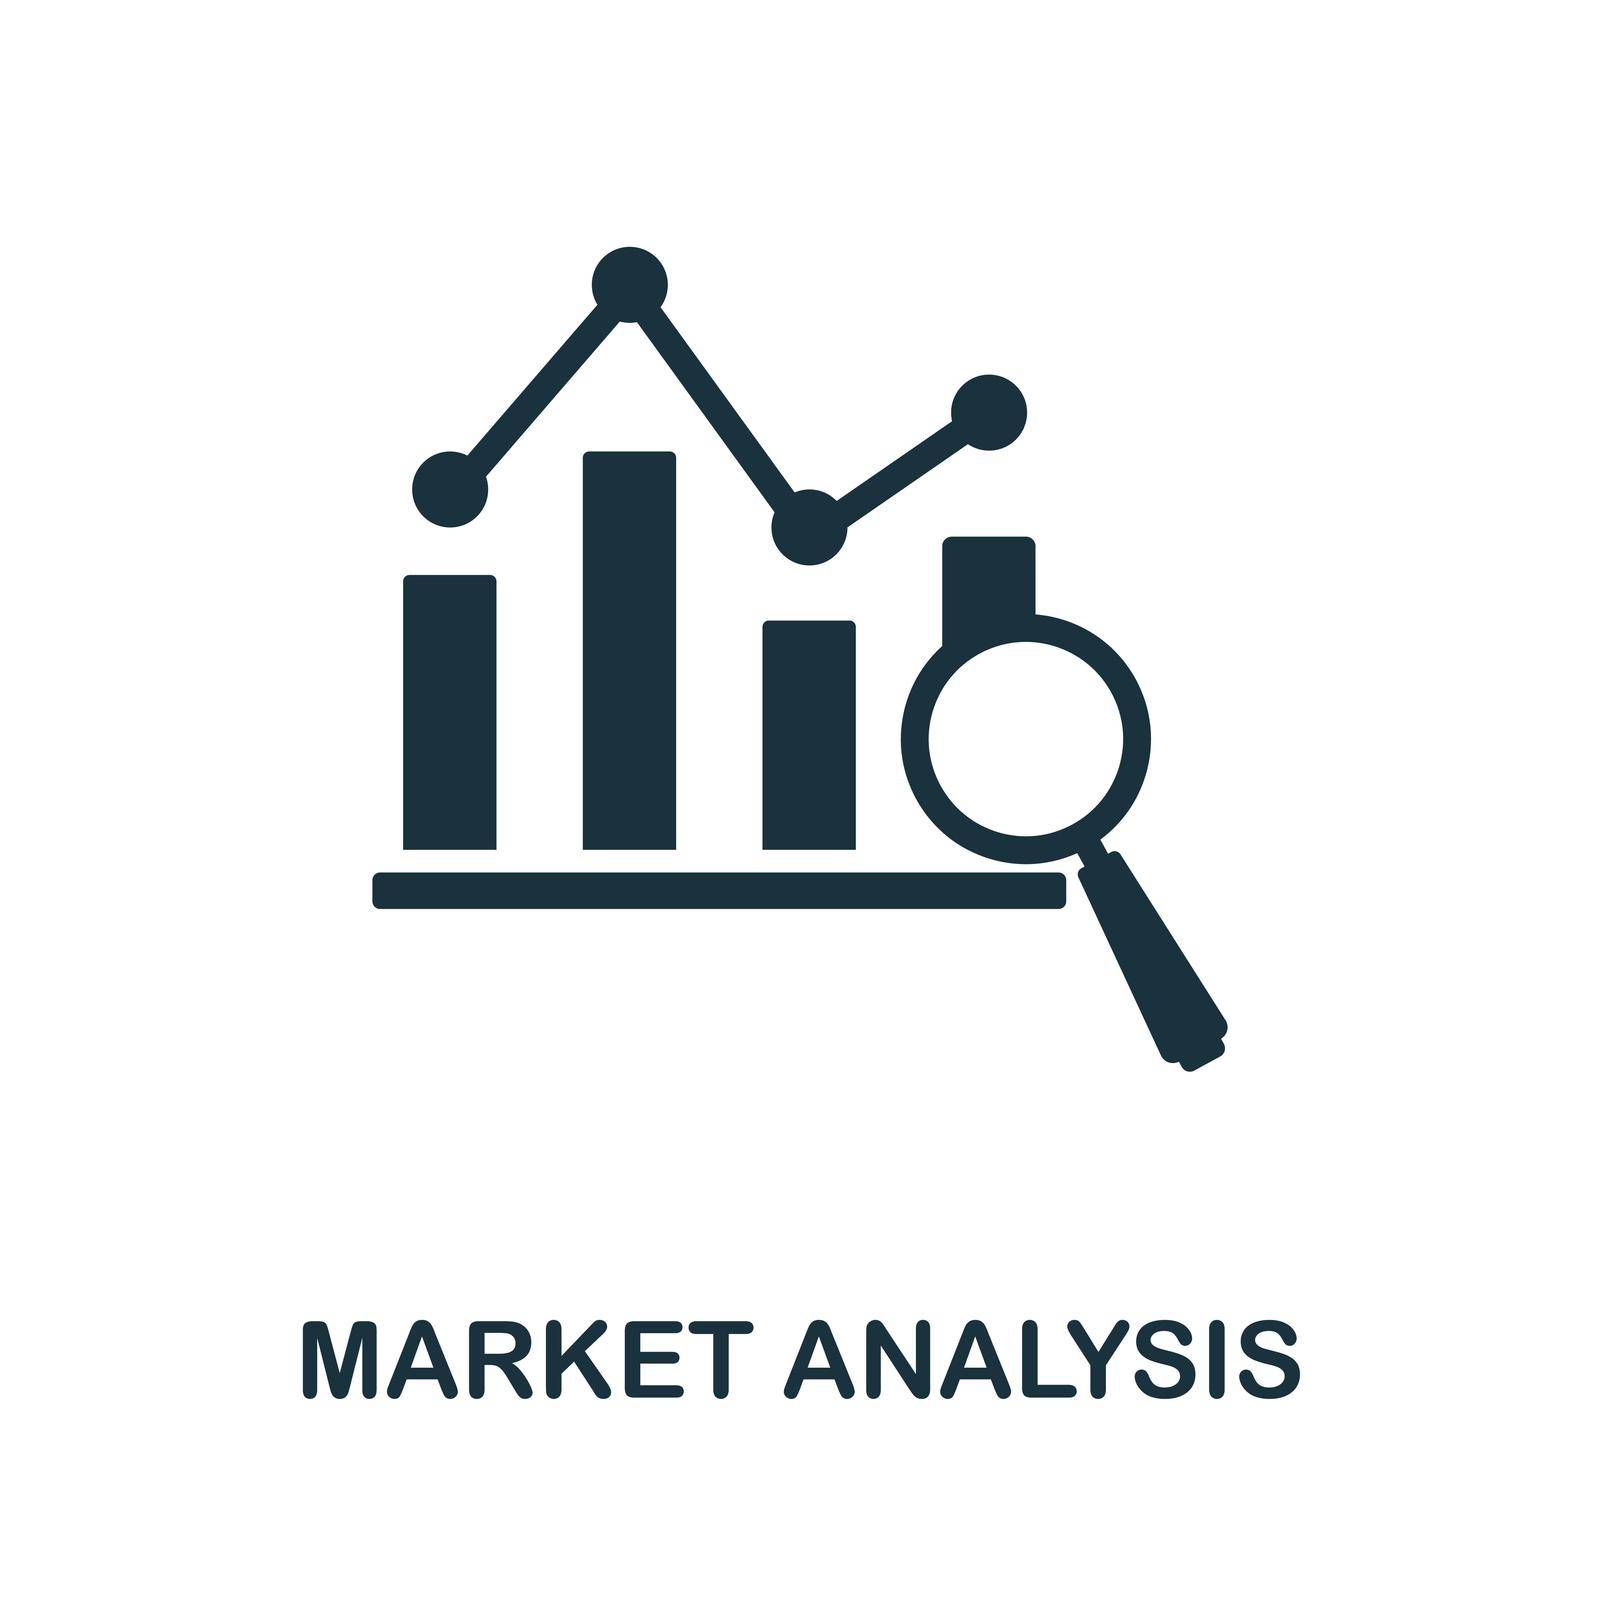 Market Analysis icon. Monochrome simple Market Analysis icon for templates, web design and infographics by simakovavector